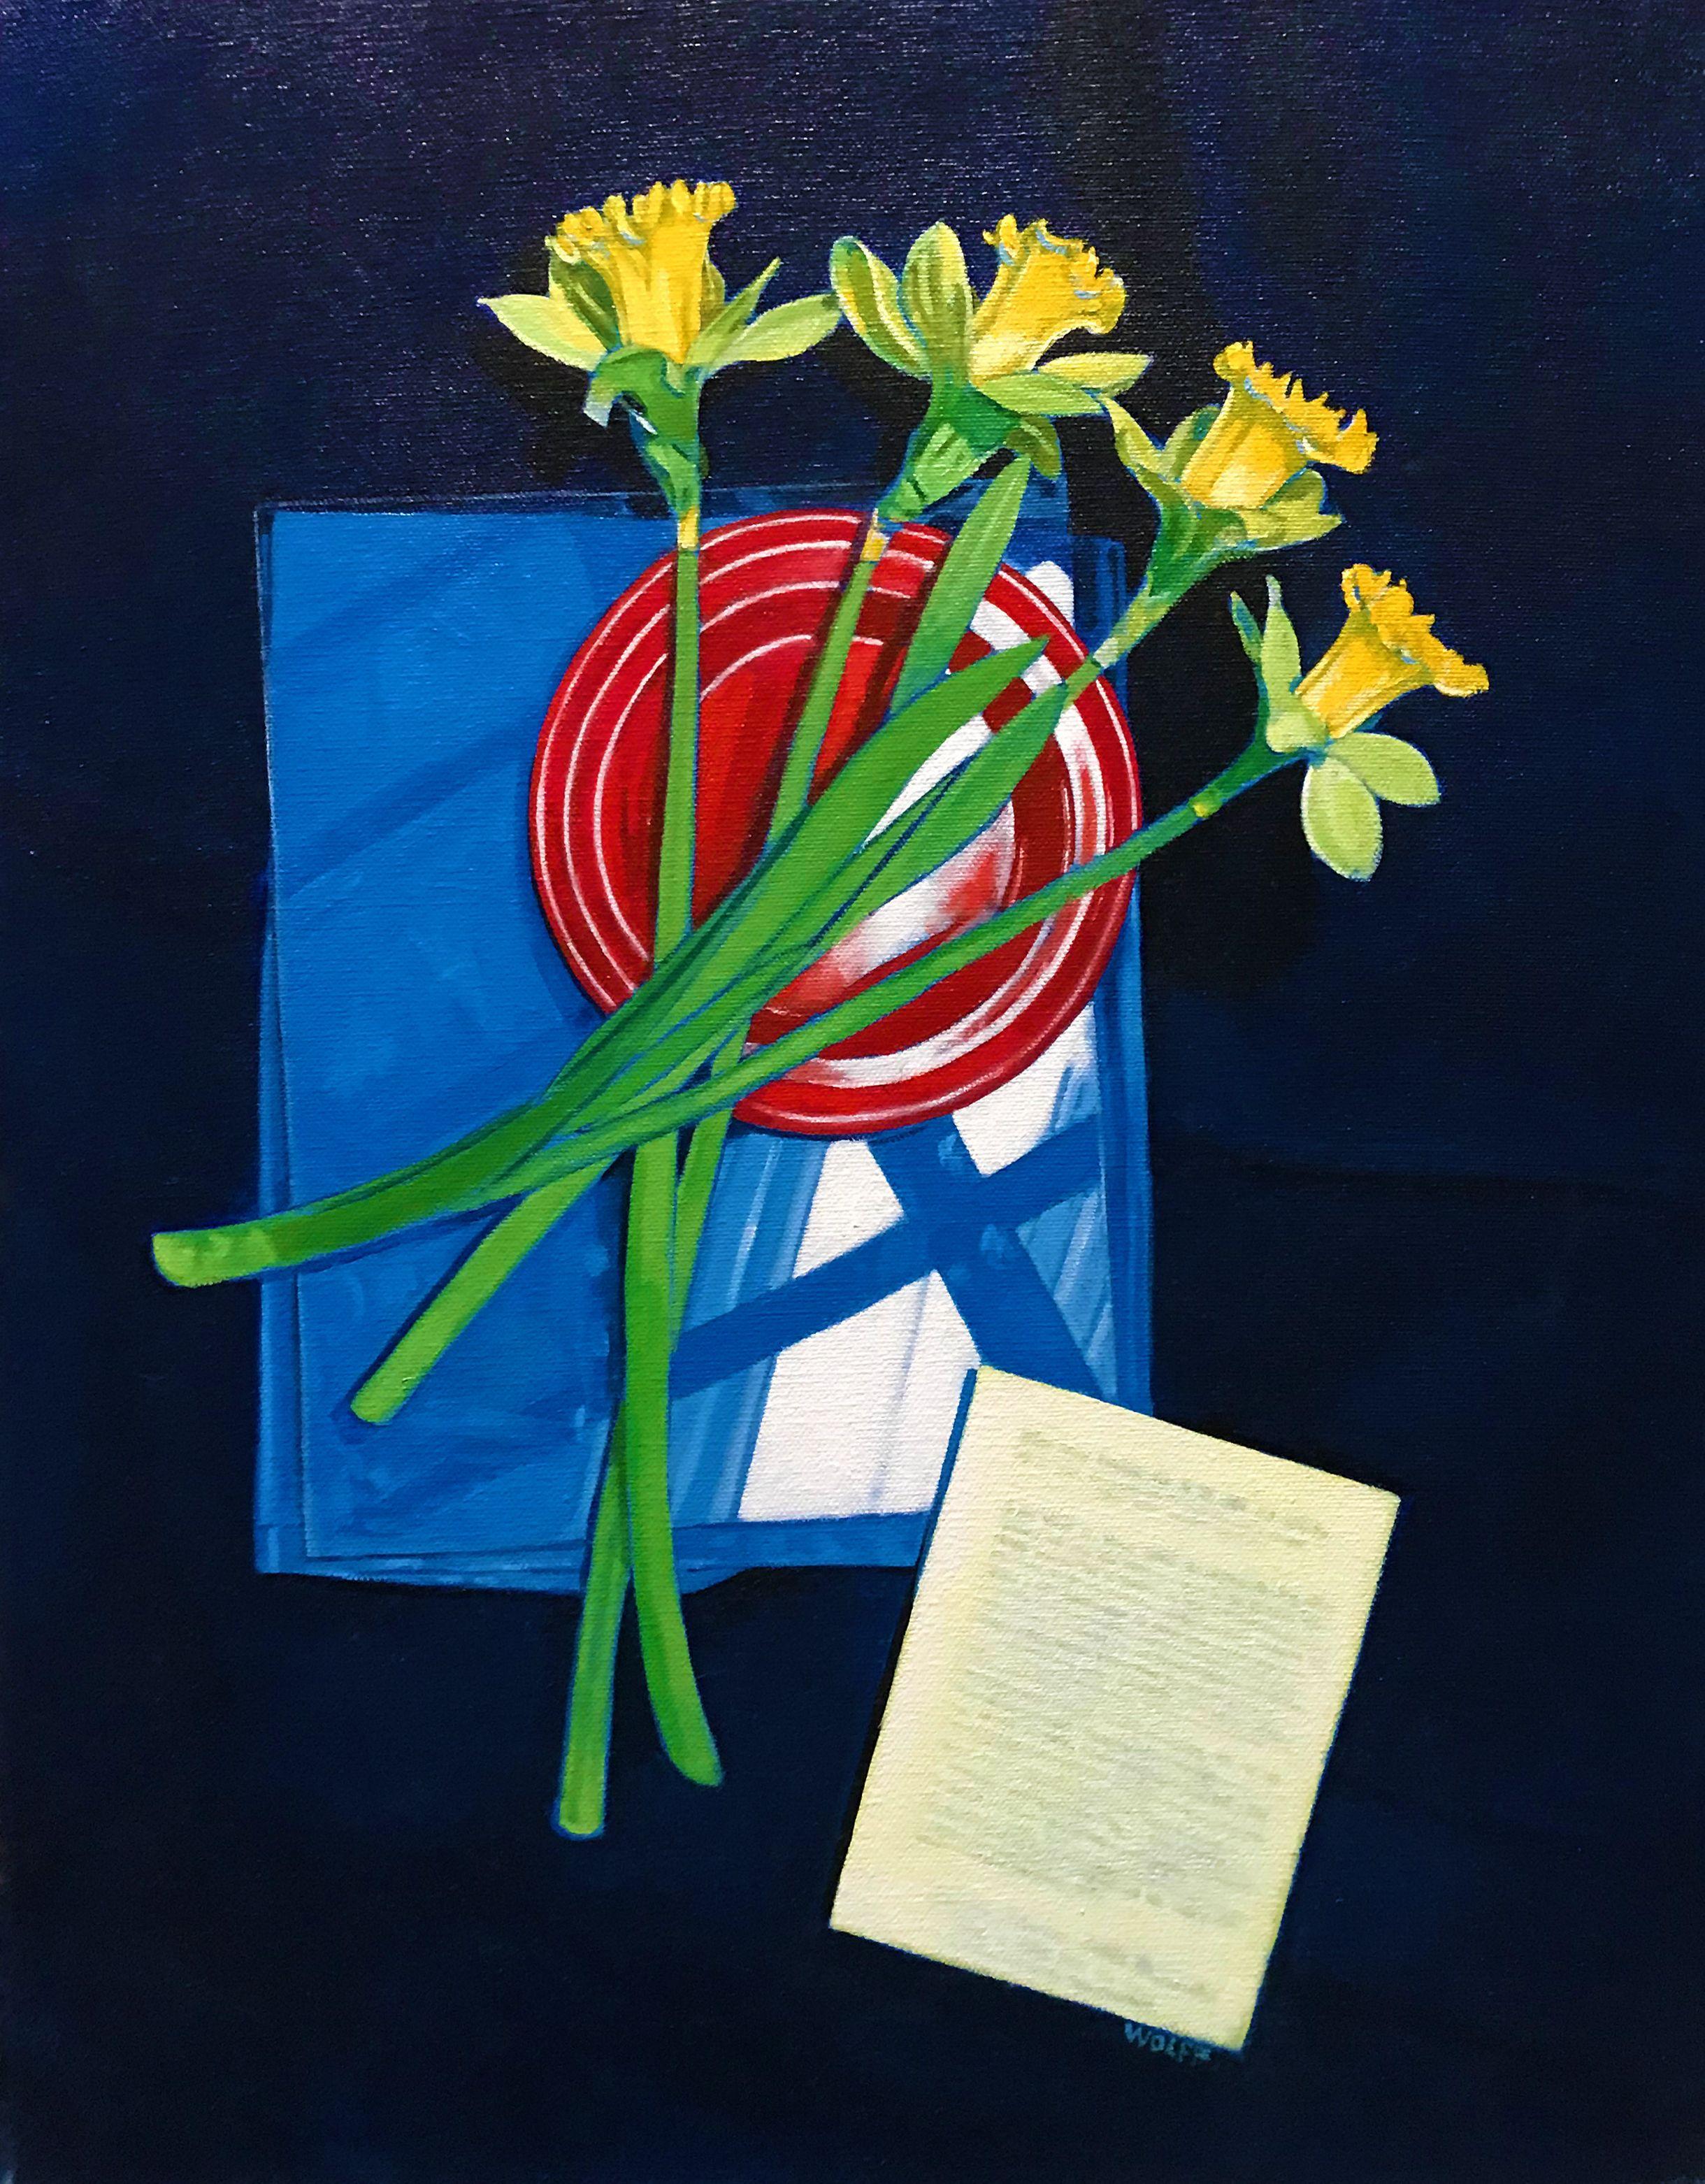 Oil painting of daffodils, plate and letter on reflective glass. :: Painting :: Realism :: This piece comes with an official certificate of authenticity signed by the artist :: Ready to Hang: Yes :: Signed: Yes :: Signature Location: lower right ::